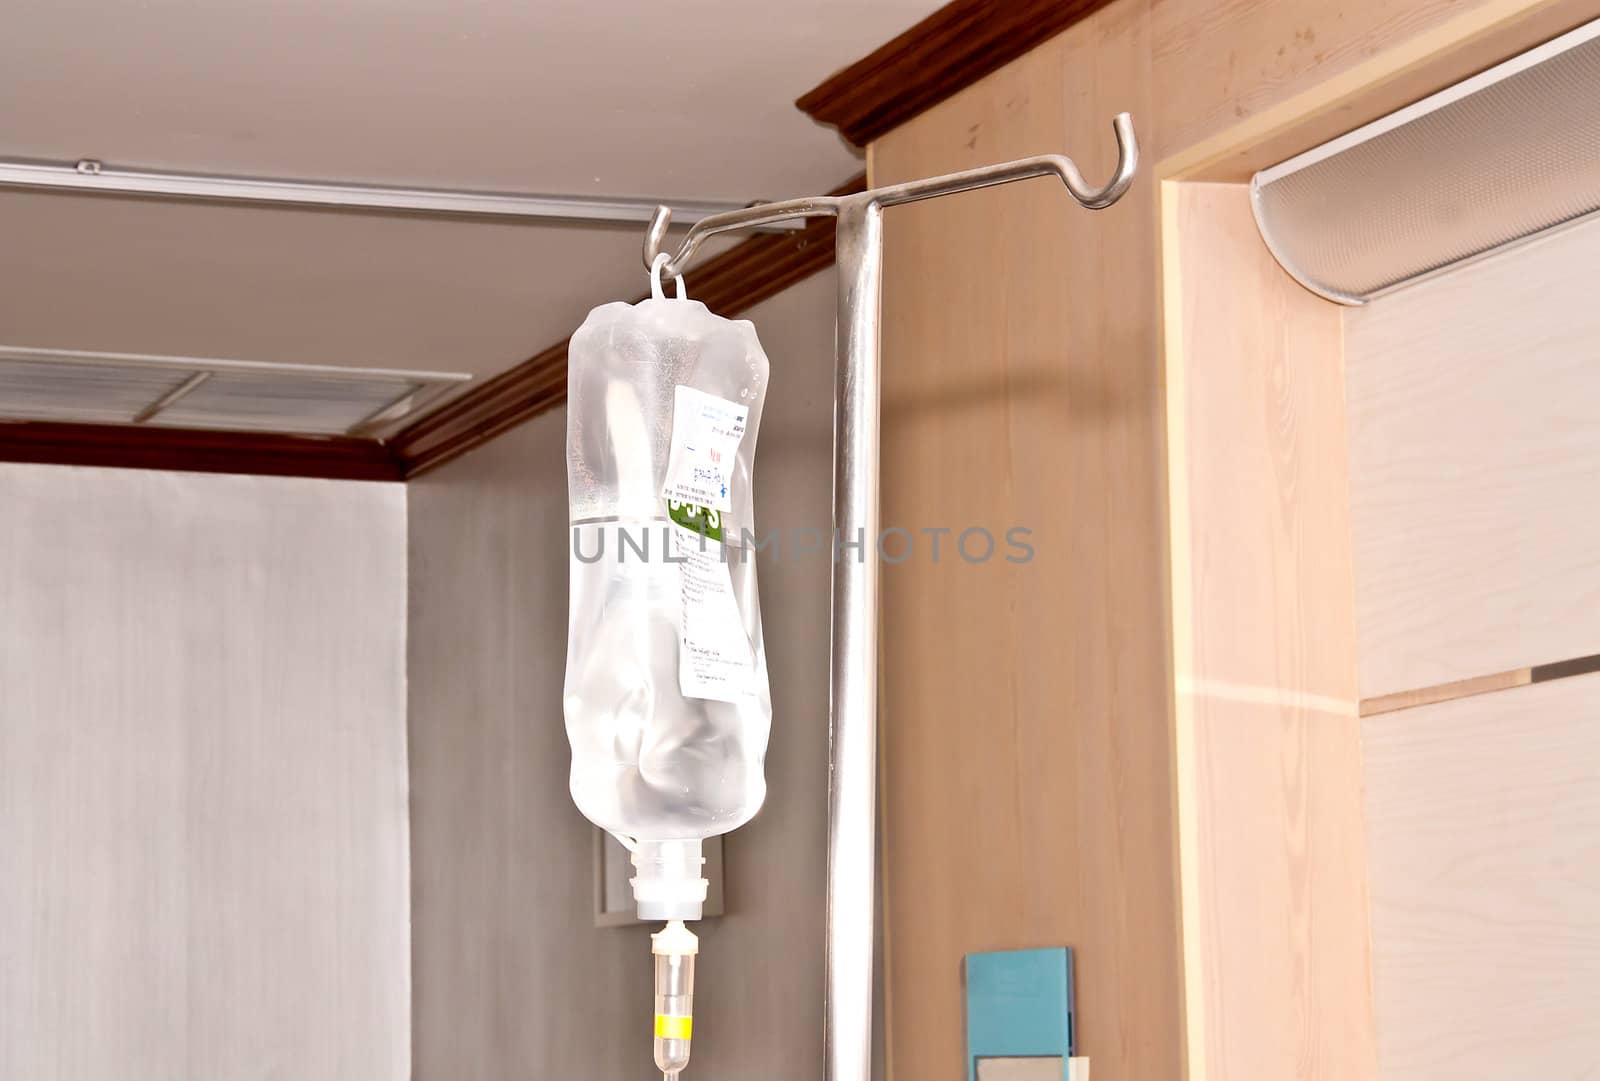 Saline bag or Intravenous therapy